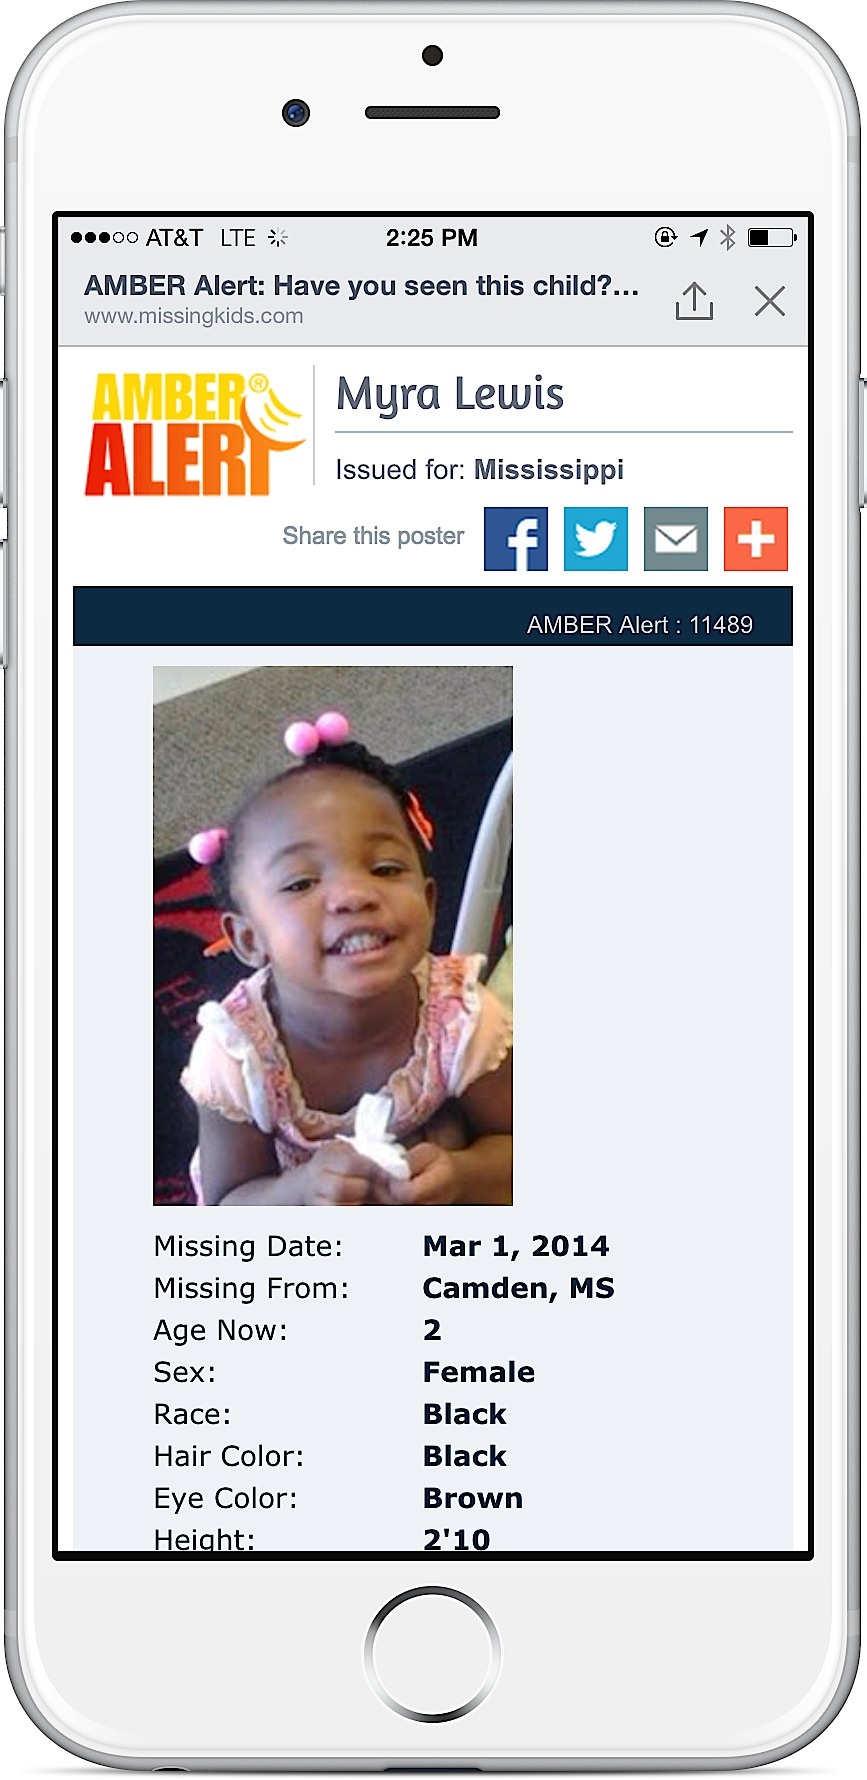 Details of the missing child will be shown in a poster that can be shared.